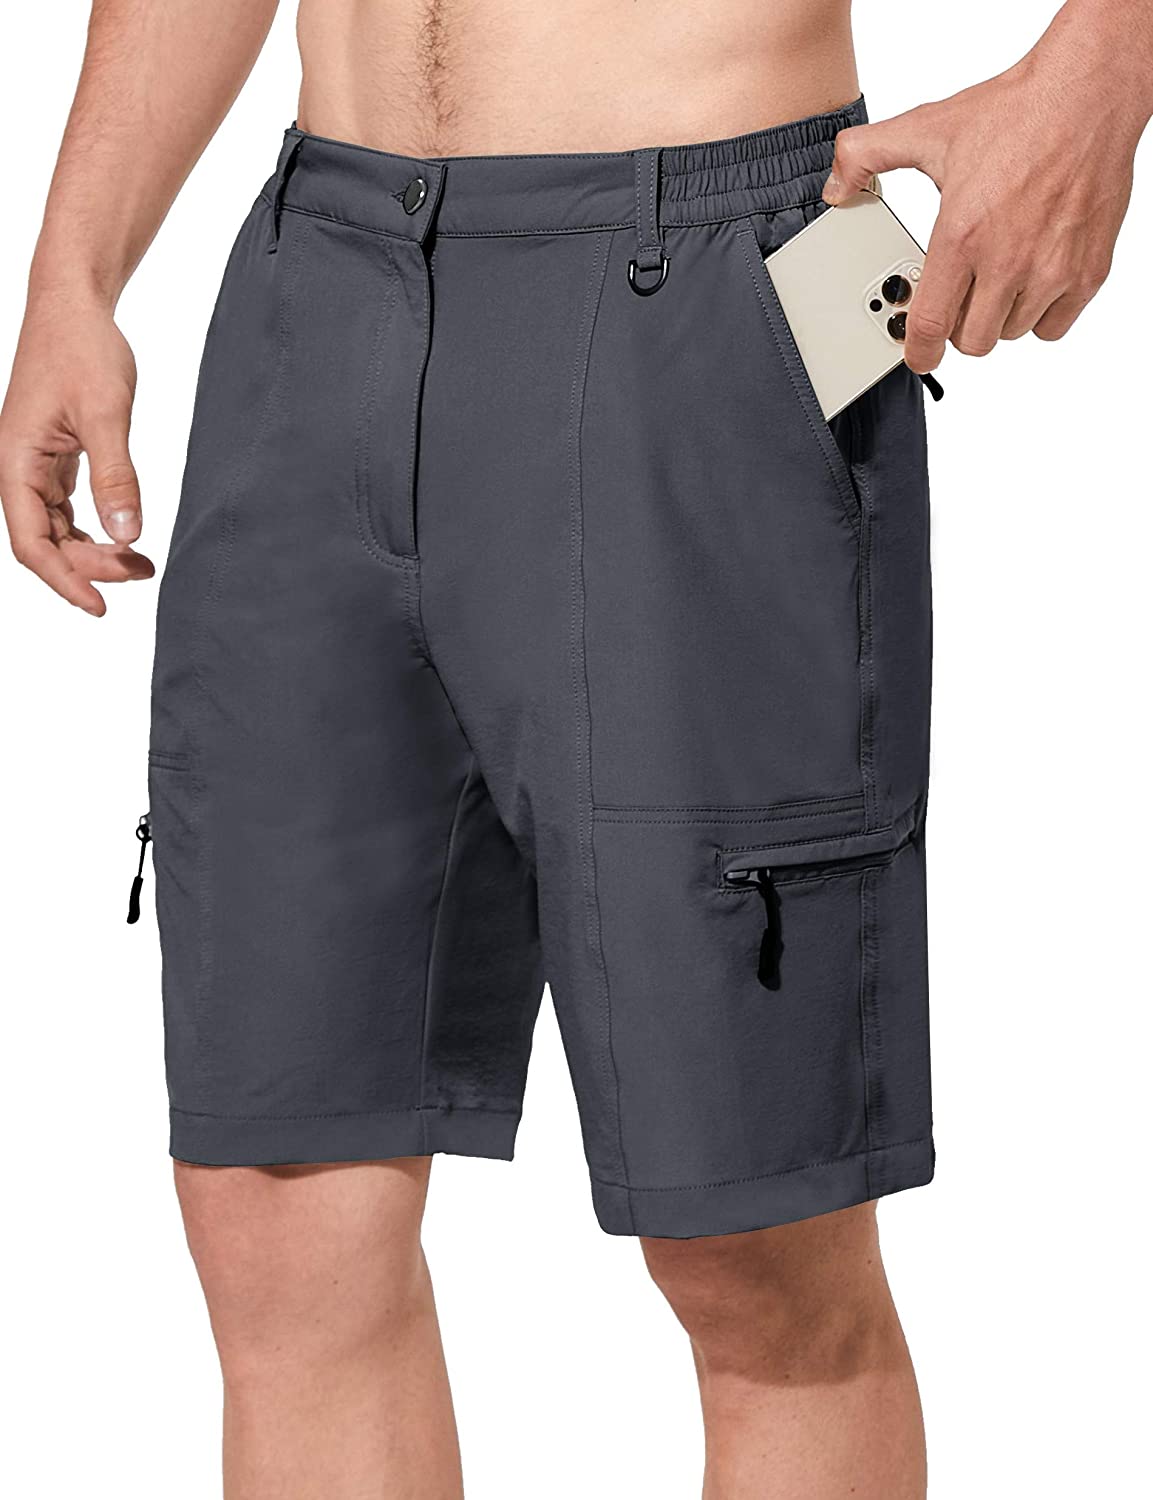 Lightweight Camping Water Resistant Shorts with Zipper Pockets SPECIALMAGIC Men's Hiking Cargo Shorts Quick Dry UPF 50